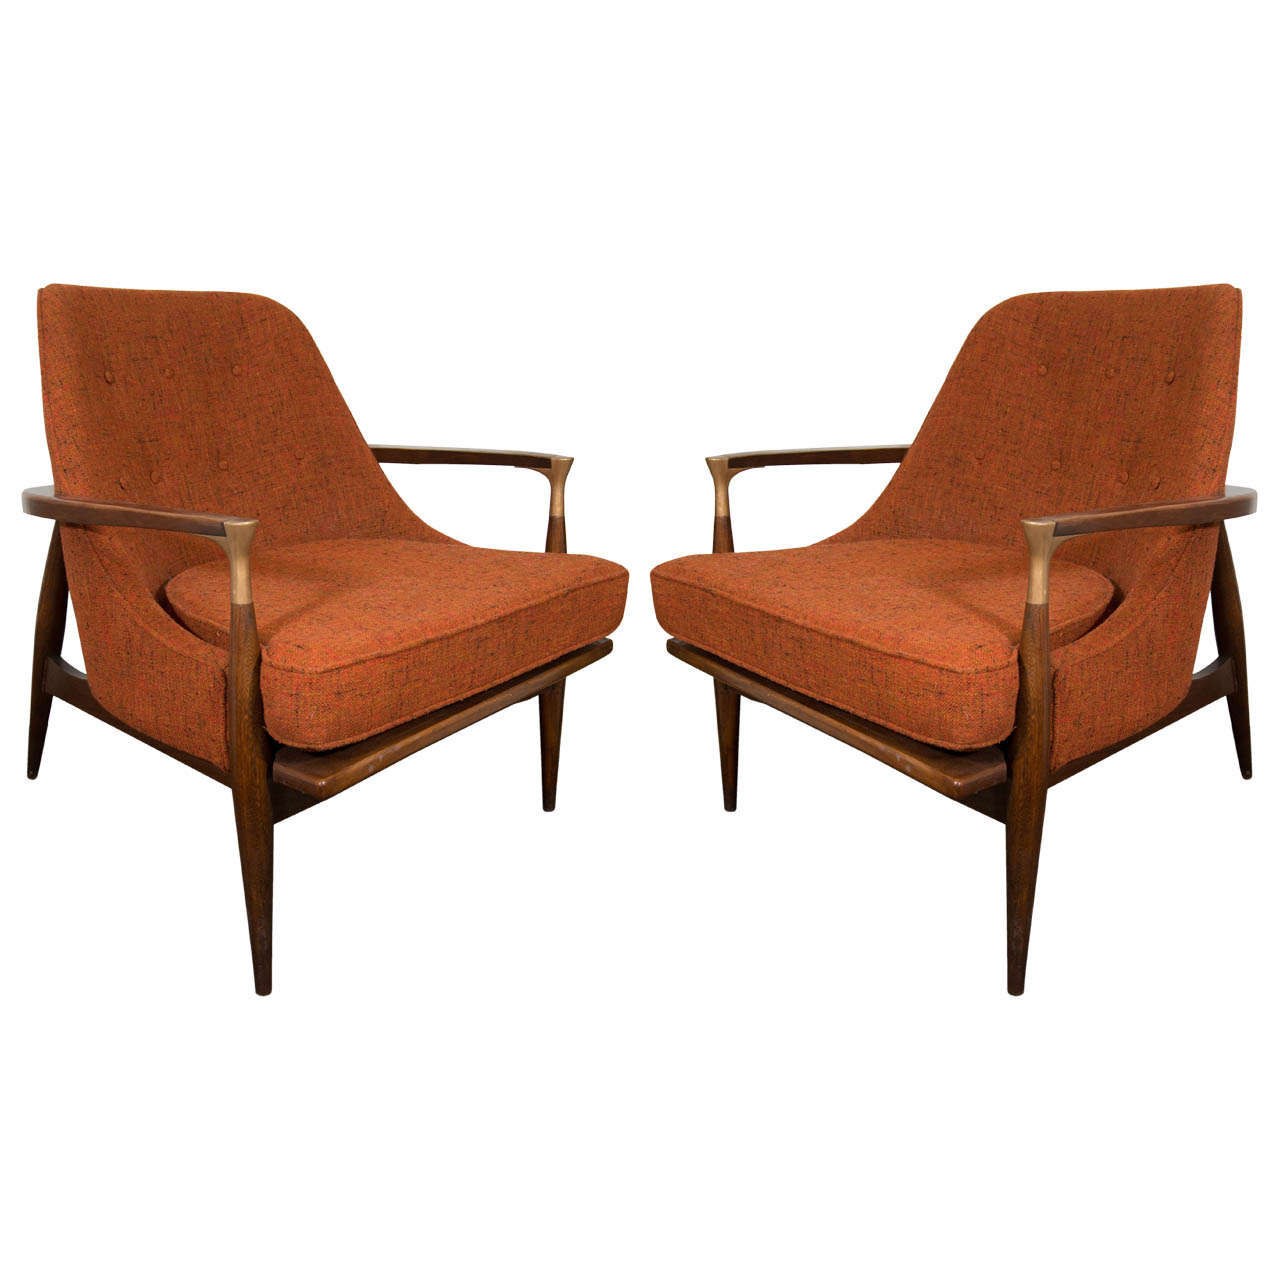 A Mid Century Pair of Ib Kofod Larsen Style Lounge or Armchairs Chairs